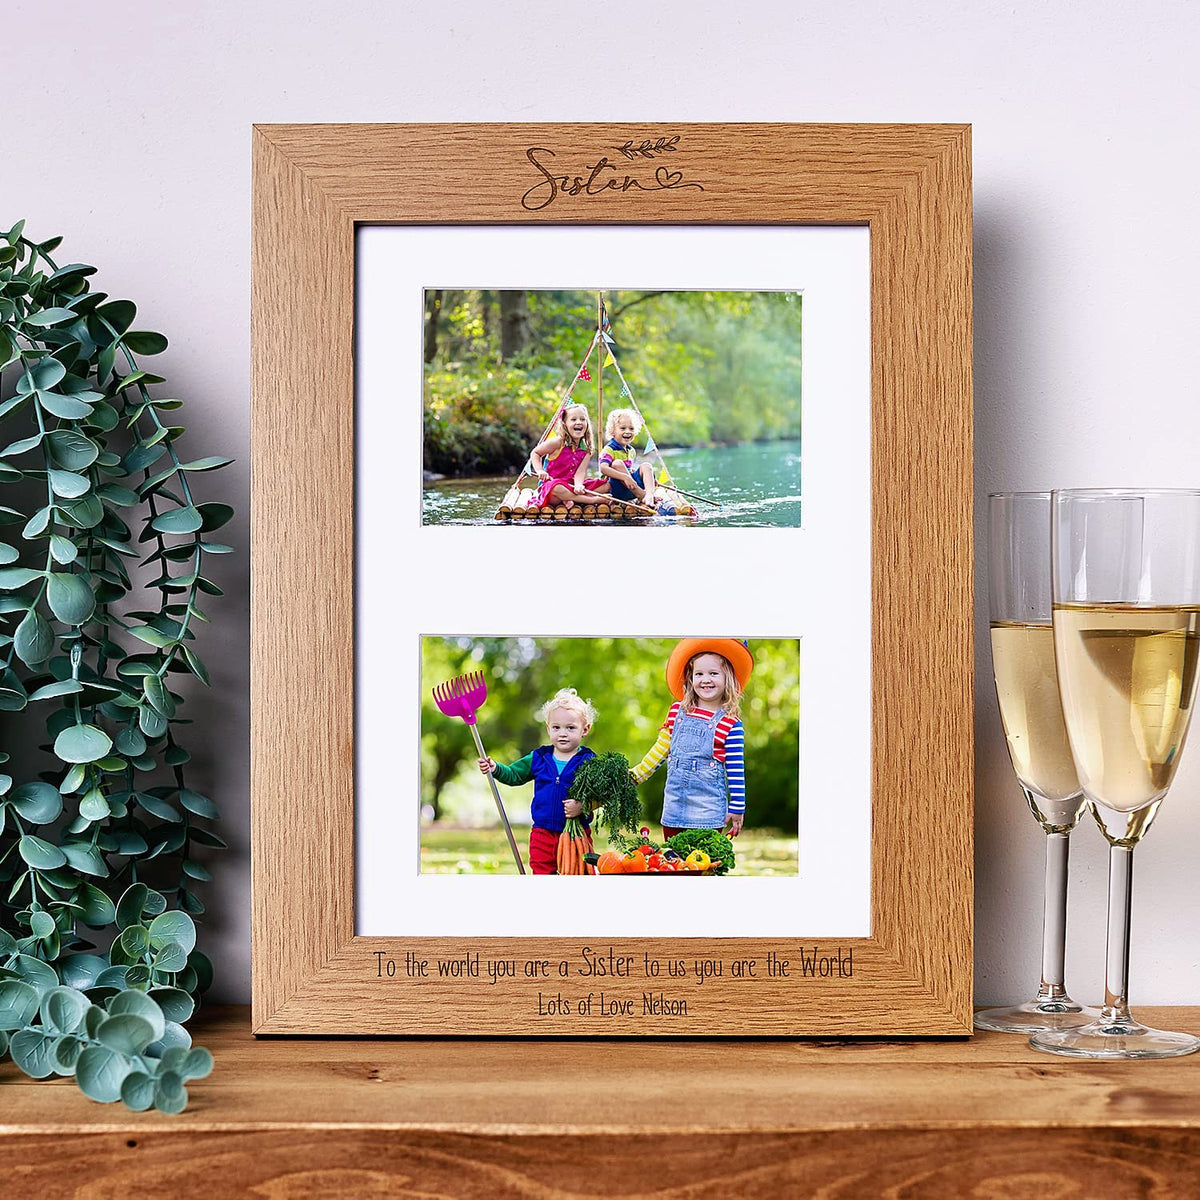 Personalised Sister Wooden Double Photo Frame Gift Landscape